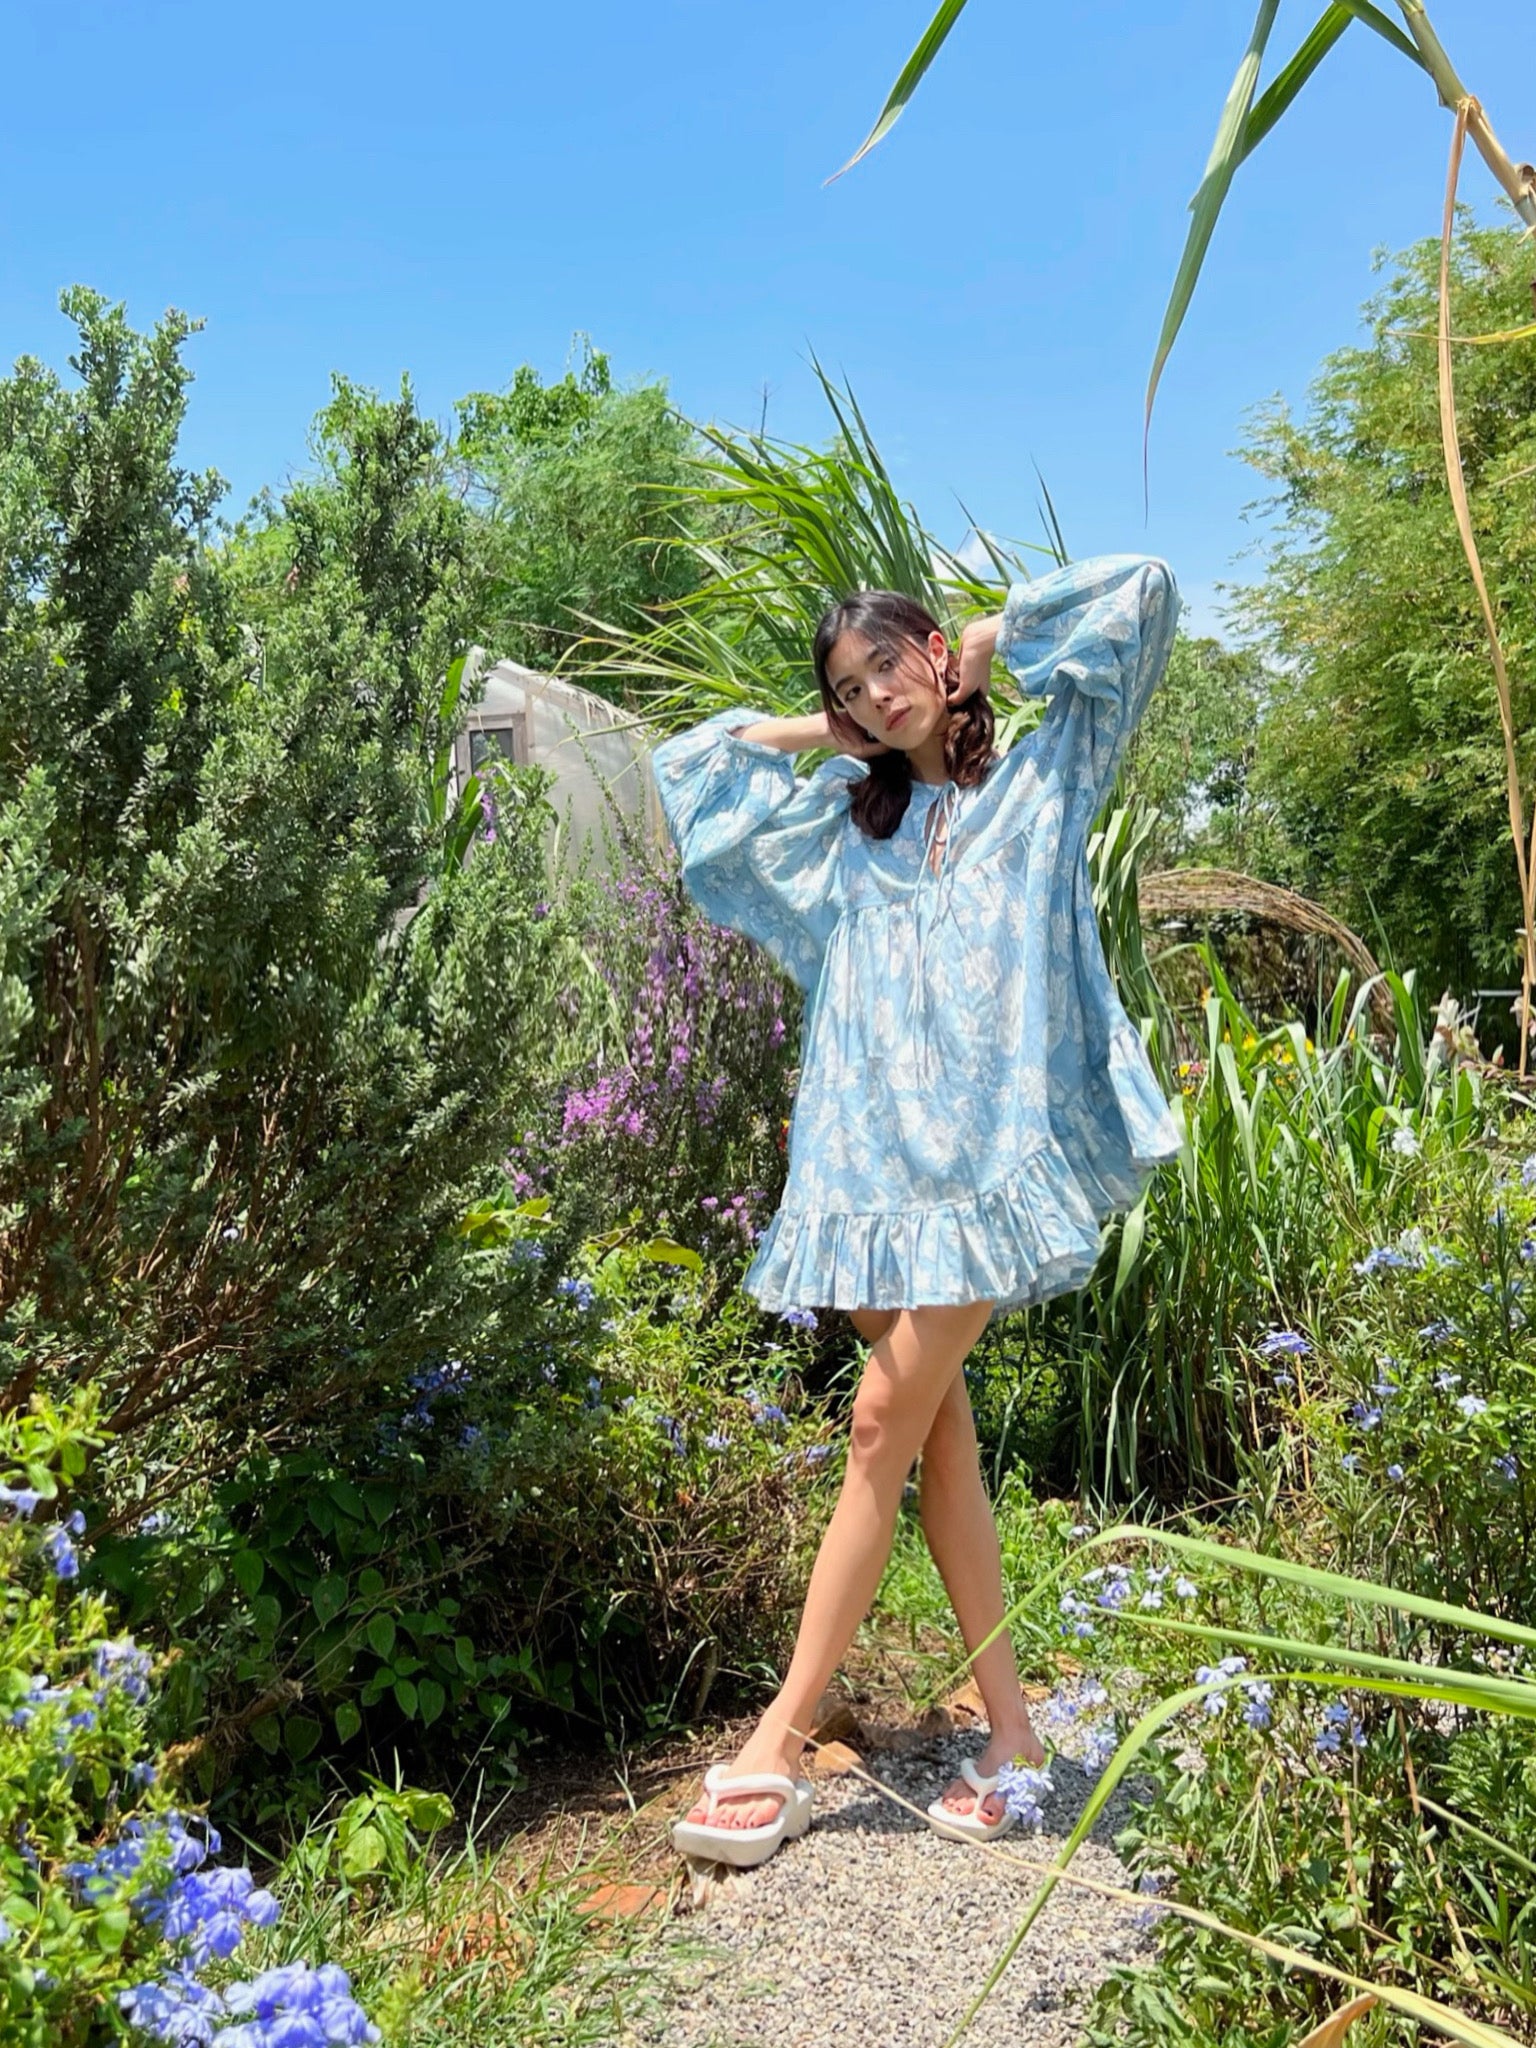 Coco de Chom Lola Bohemian Mini Dress in Beautiful Blue Sky - A Truly Unique Limited Edition Piece. Handcrafted with Wooden Blocks on Fine Cotton Voile, Showcasing a Dreamy Block Printed Pattern Inspired by Bougainvillea Flowers and Vacations. Ideal for Beach Days, Vacations, and Boho Enthusiasts.